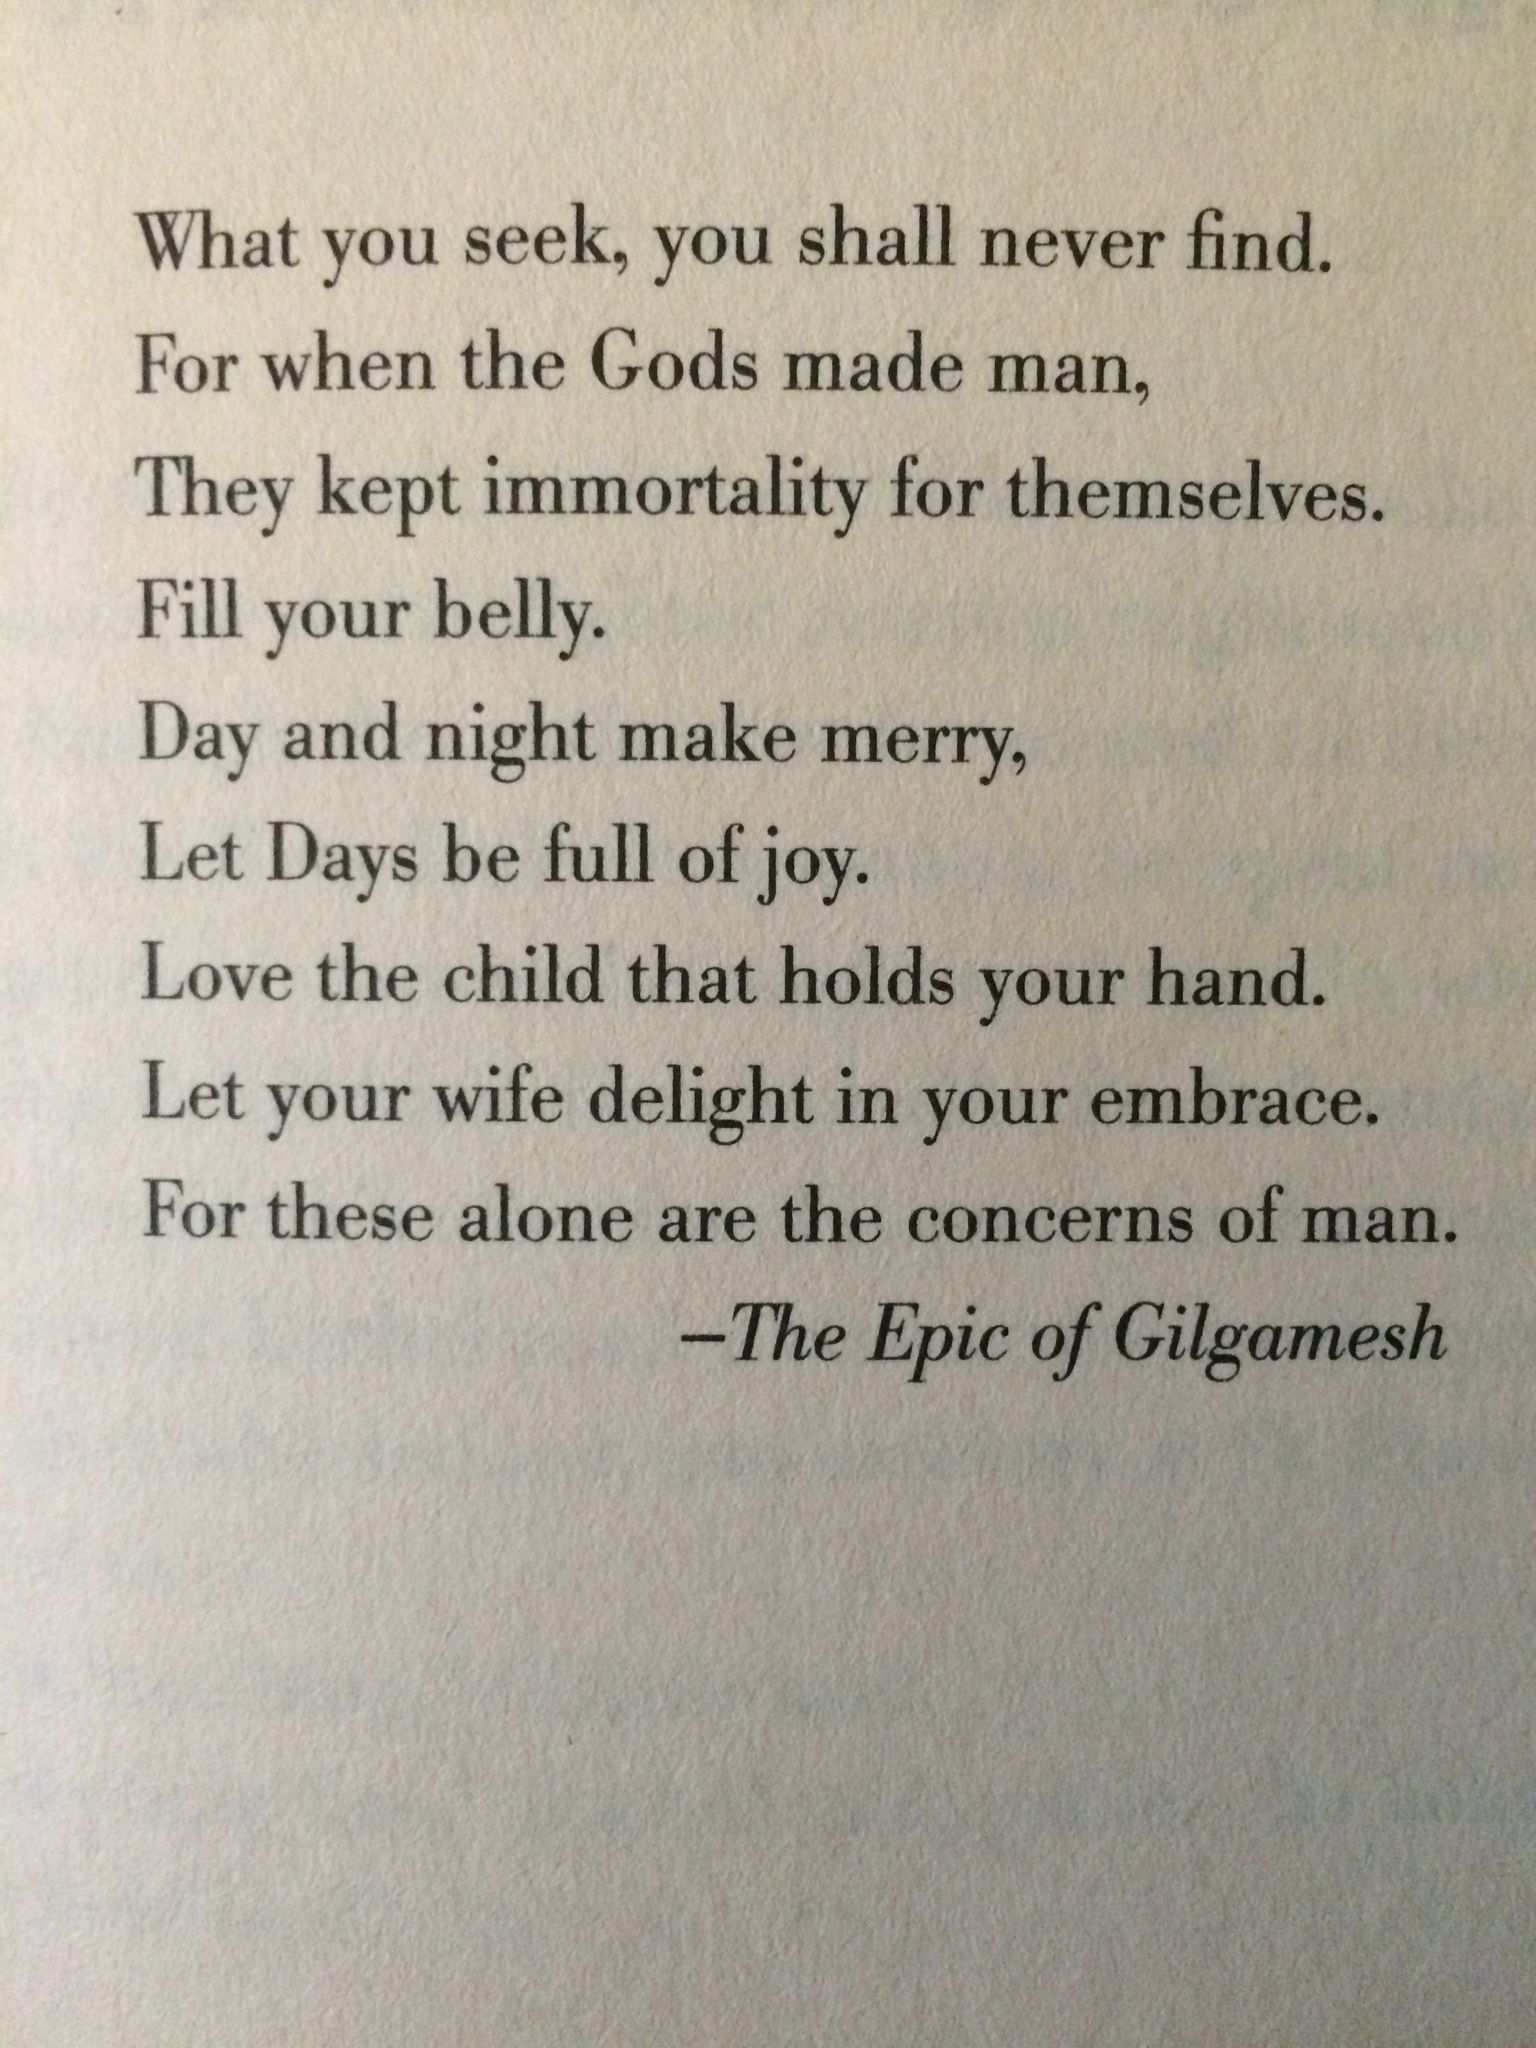 The Importance Of Friendship In The Epic Of Gilgamesh